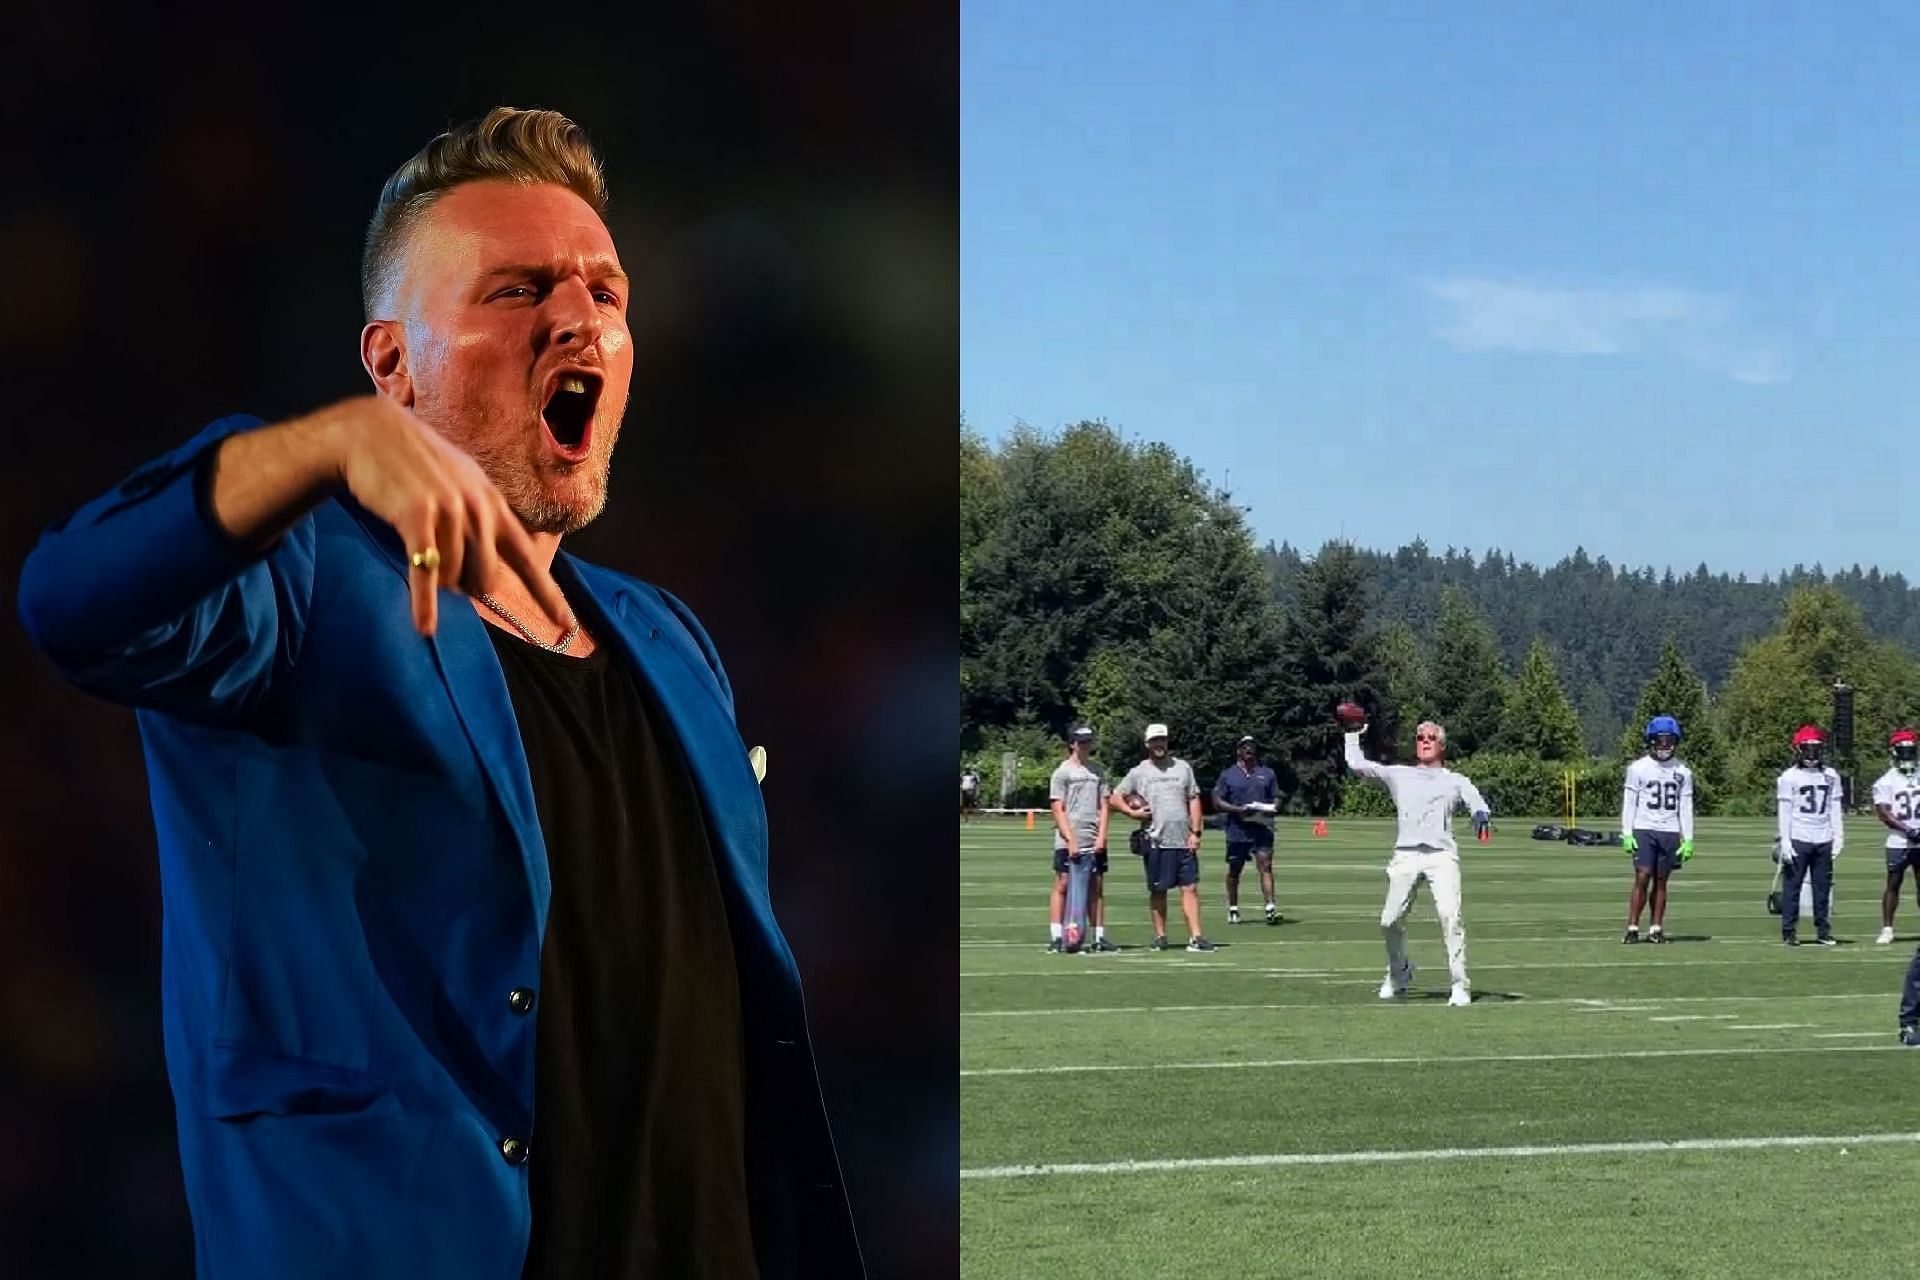  Pat McAfee left in awe of Pete Carroll after Seahawks HC